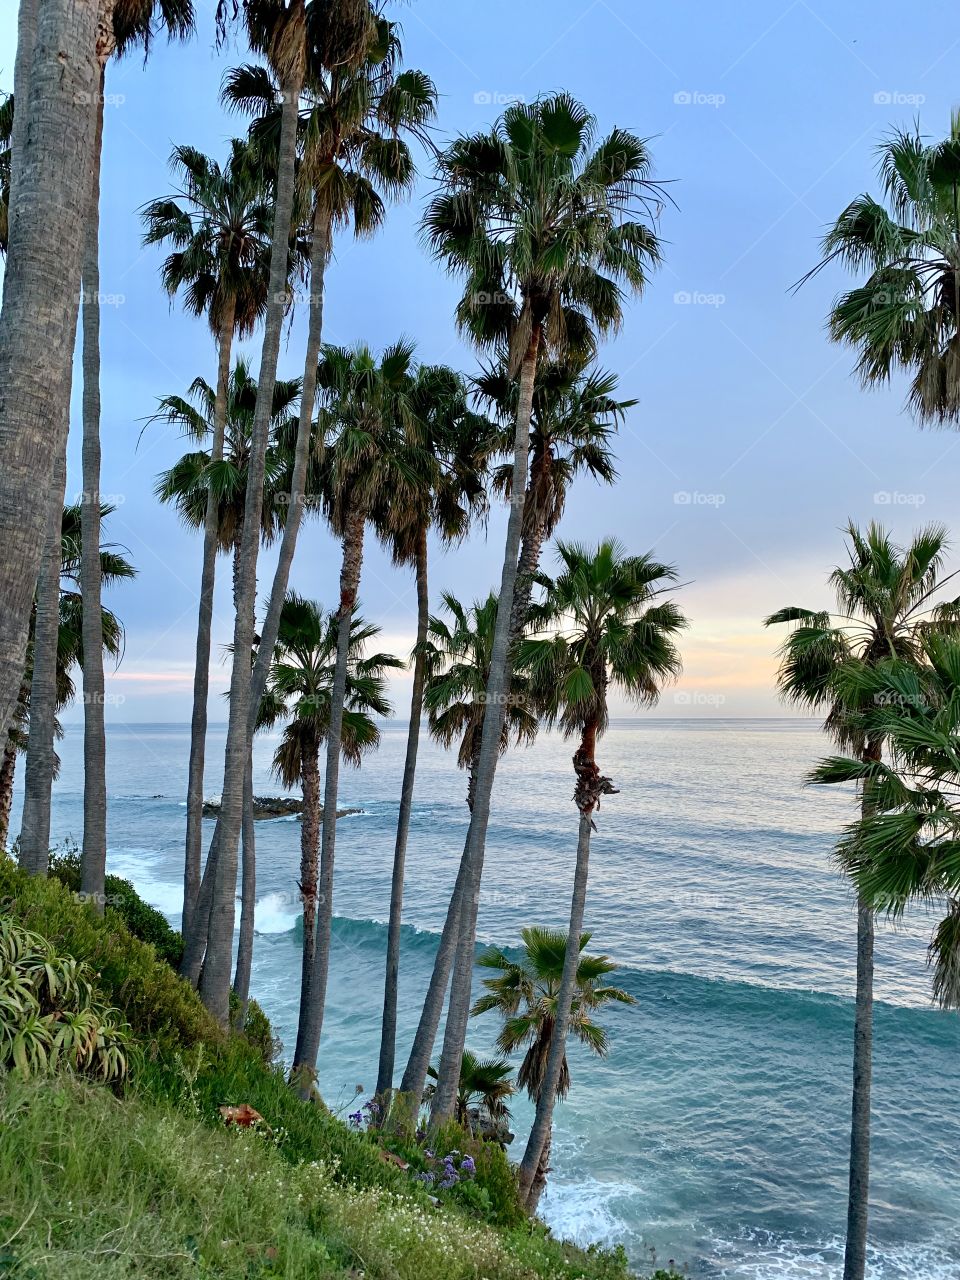 Palm trees along the shoreline at sunset with blue ocean water in the background.